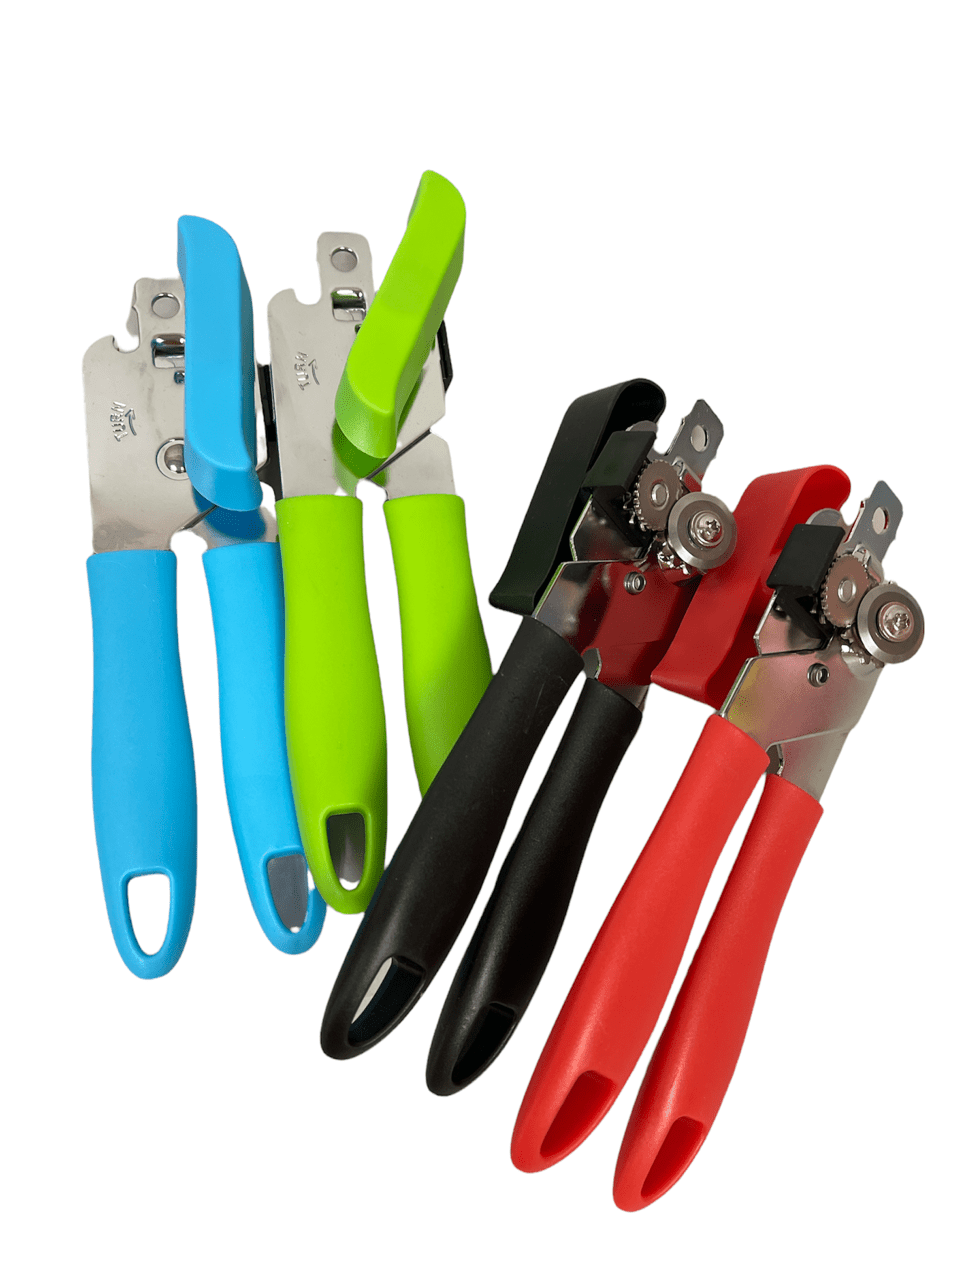 Grand Openings 3-in-1 Can Opener, CO1200B